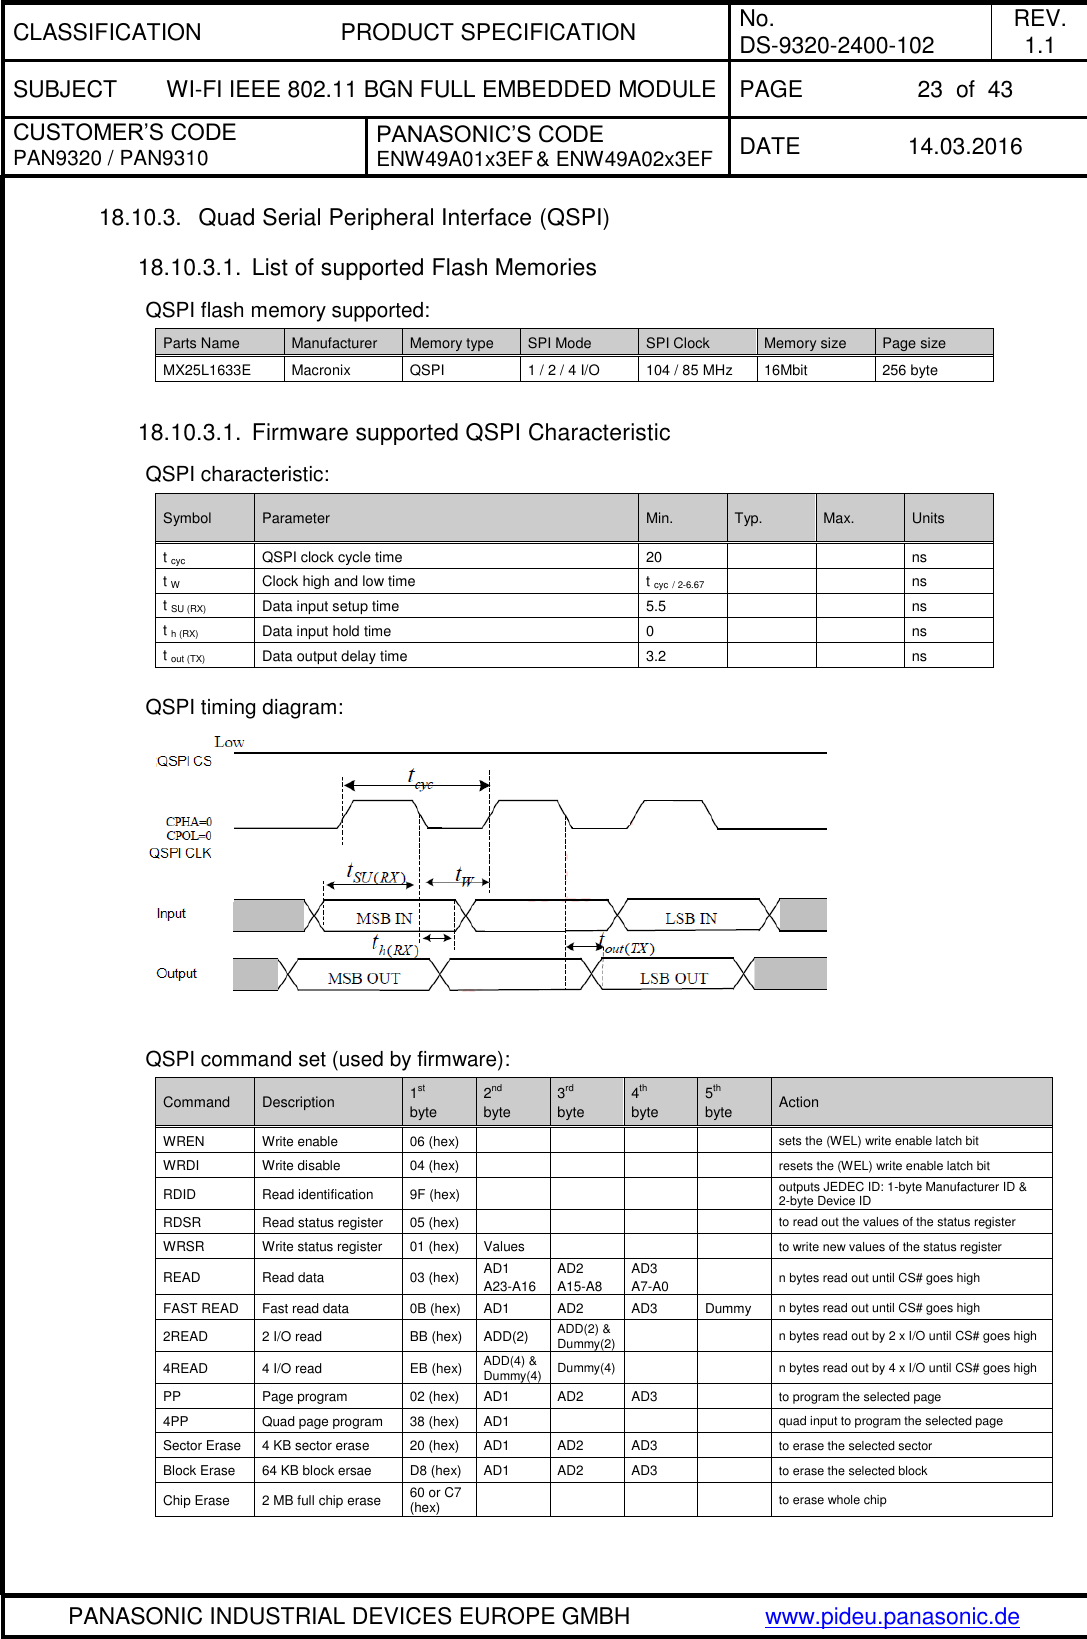 CLASSIFICATION PRODUCT SPECIFICATION No. DS-9320-2400-102 REV. 1.1 SUBJECT WI-FI IEEE 802.11 BGN FULL EMBEDDED MODULE PAGE 23  of  43 CUSTOMER’S CODE PAN9320 / PAN9310 PANASONIC’S CODE ENW49A01x3EF &amp; ENW49A02x3EF DATE 14.03.2016   PANASONIC INDUSTRIAL DEVICES EUROPE GMBH www.pideu.panasonic.de  18.10.3.  Quad Serial Peripheral Interface (QSPI)  18.10.3.1.  List of supported Flash Memories  QSPI flash memory supported: Parts Name Manufacturer Memory type SPI Mode SPI Clock Memory size Page size MX25L1633E Macronix QSPI 1 / 2 / 4 I/O 104 / 85 MHz 16Mbit 256 byte  18.10.3.1.  Firmware supported QSPI Characteristic  QSPI characteristic: Symbol Parameter Min. Typ. Max. Units t cyc QSPI clock cycle time 20   ns t W Clock high and low time t cyc / 2-6.67   ns t SU (RX) Data input setup time 5.5   ns t h (RX) Data input hold time 0   ns t out (TX) Data output delay time 3.2   ns   QSPI timing diagram:   QSPI command set (used by firmware): Command Description 1st byte 2nd byte 3rd byte 4th byte 5th byte Action WREN Write enable 06 (hex)     sets the (WEL) write enable latch bit WRDI Write disable 04 (hex)     resets the (WEL) write enable latch bit RDID Read identification 9F (hex)     outputs JEDEC ID: 1-byte Manufacturer ID &amp;  2-byte Device ID RDSR Read status register 05 (hex)     to read out the values of the status register WRSR Write status register 01 (hex) Values    to write new values of the status register READ Read data 03 (hex) AD1 A23-A16 AD2 A15-A8 AD3 A7-A0  n bytes read out until CS# goes high FAST READ Fast read data 0B (hex) AD1 AD2 AD3 Dummy n bytes read out until CS# goes high 2READ 2 I/O read BB (hex) ADD(2) ADD(2) &amp; Dummy(2)   n bytes read out by 2 x I/O until CS# goes high 4READ 4 I/O read EB (hex) ADD(4) &amp; Dummy(4) Dummy(4)   n bytes read out by 4 x I/O until CS# goes high PP Page program 02 (hex) AD1 AD2 AD3  to program the selected page 4PP Quad page program 38 (hex) AD1    quad input to program the selected page Sector Erase 4 KB sector erase 20 (hex) AD1 AD2 AD3  to erase the selected sector Block Erase 64 KB block ersae D8 (hex) AD1 AD2 AD3  to erase the selected block Chip Erase 2 MB full chip erase 60 or C7 (hex)     to erase whole chip  